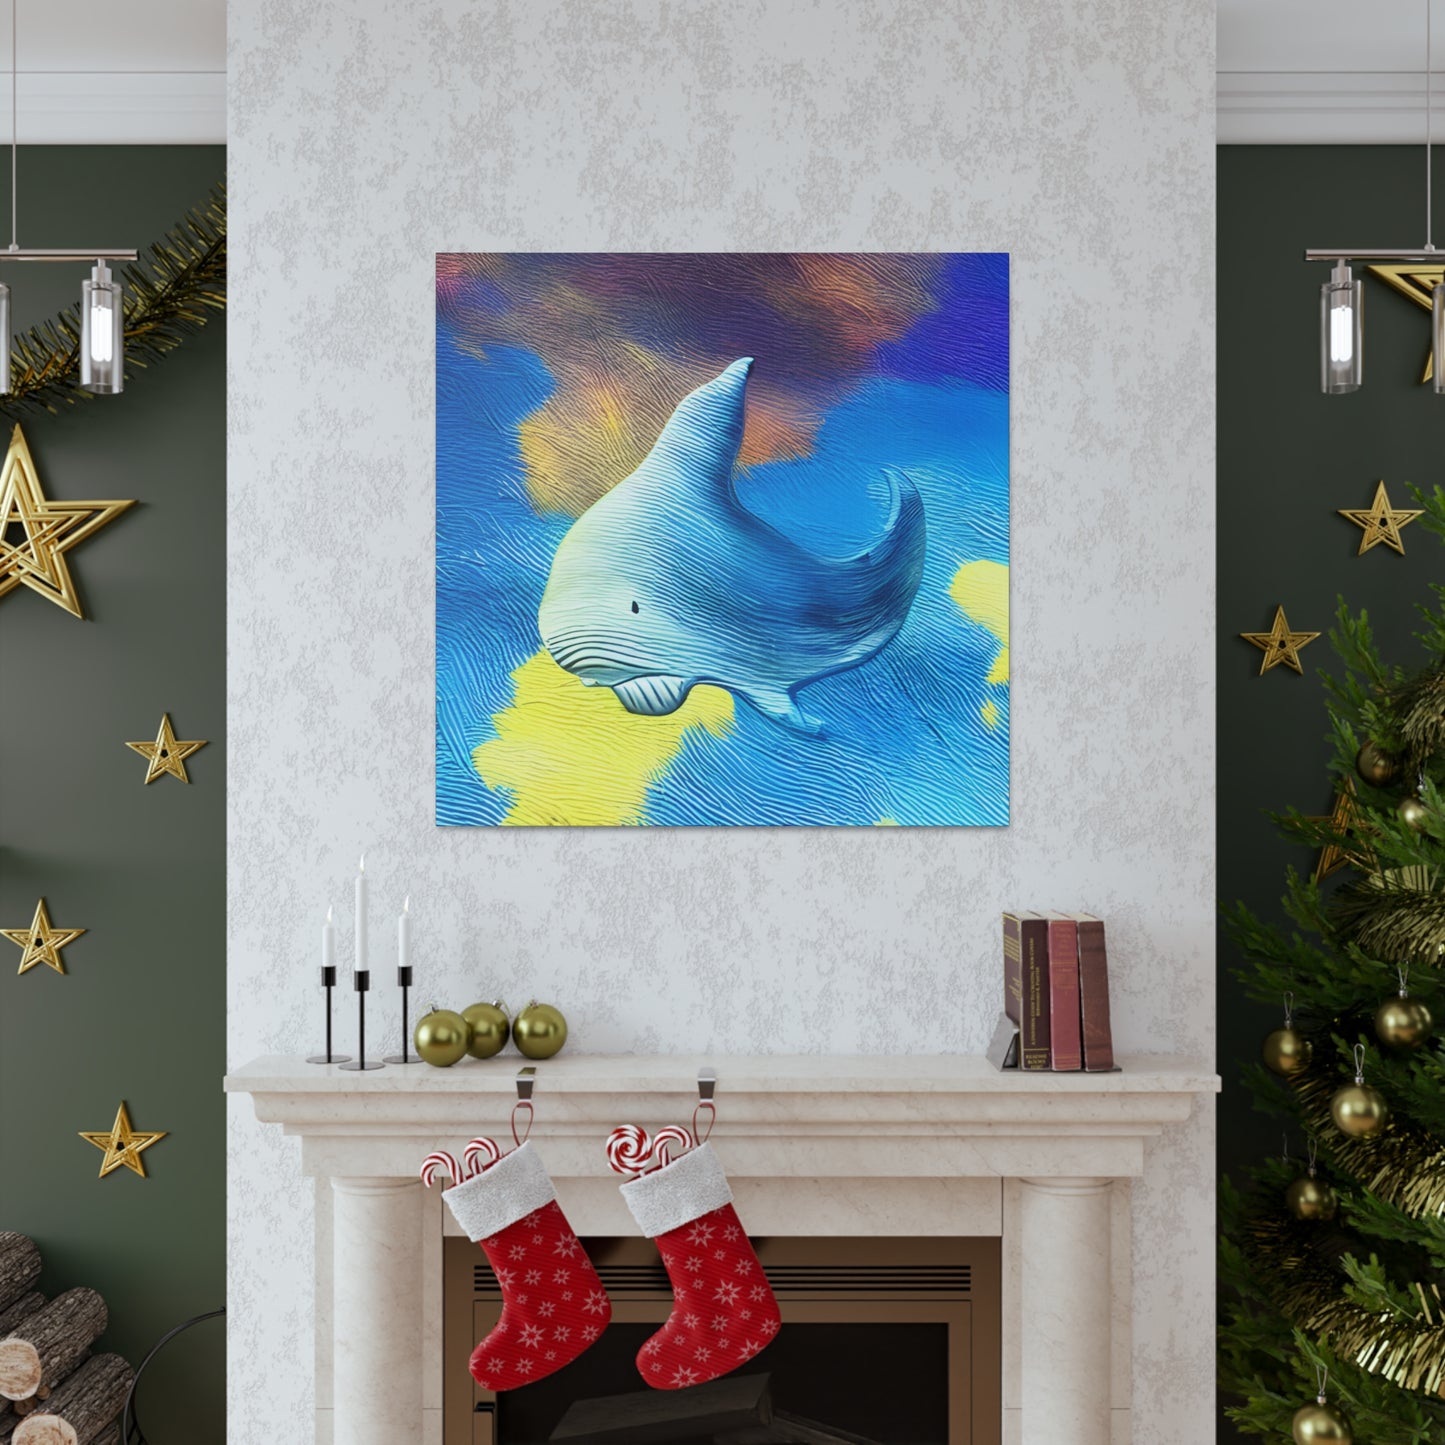 Whale Sky - Gallery Canvas